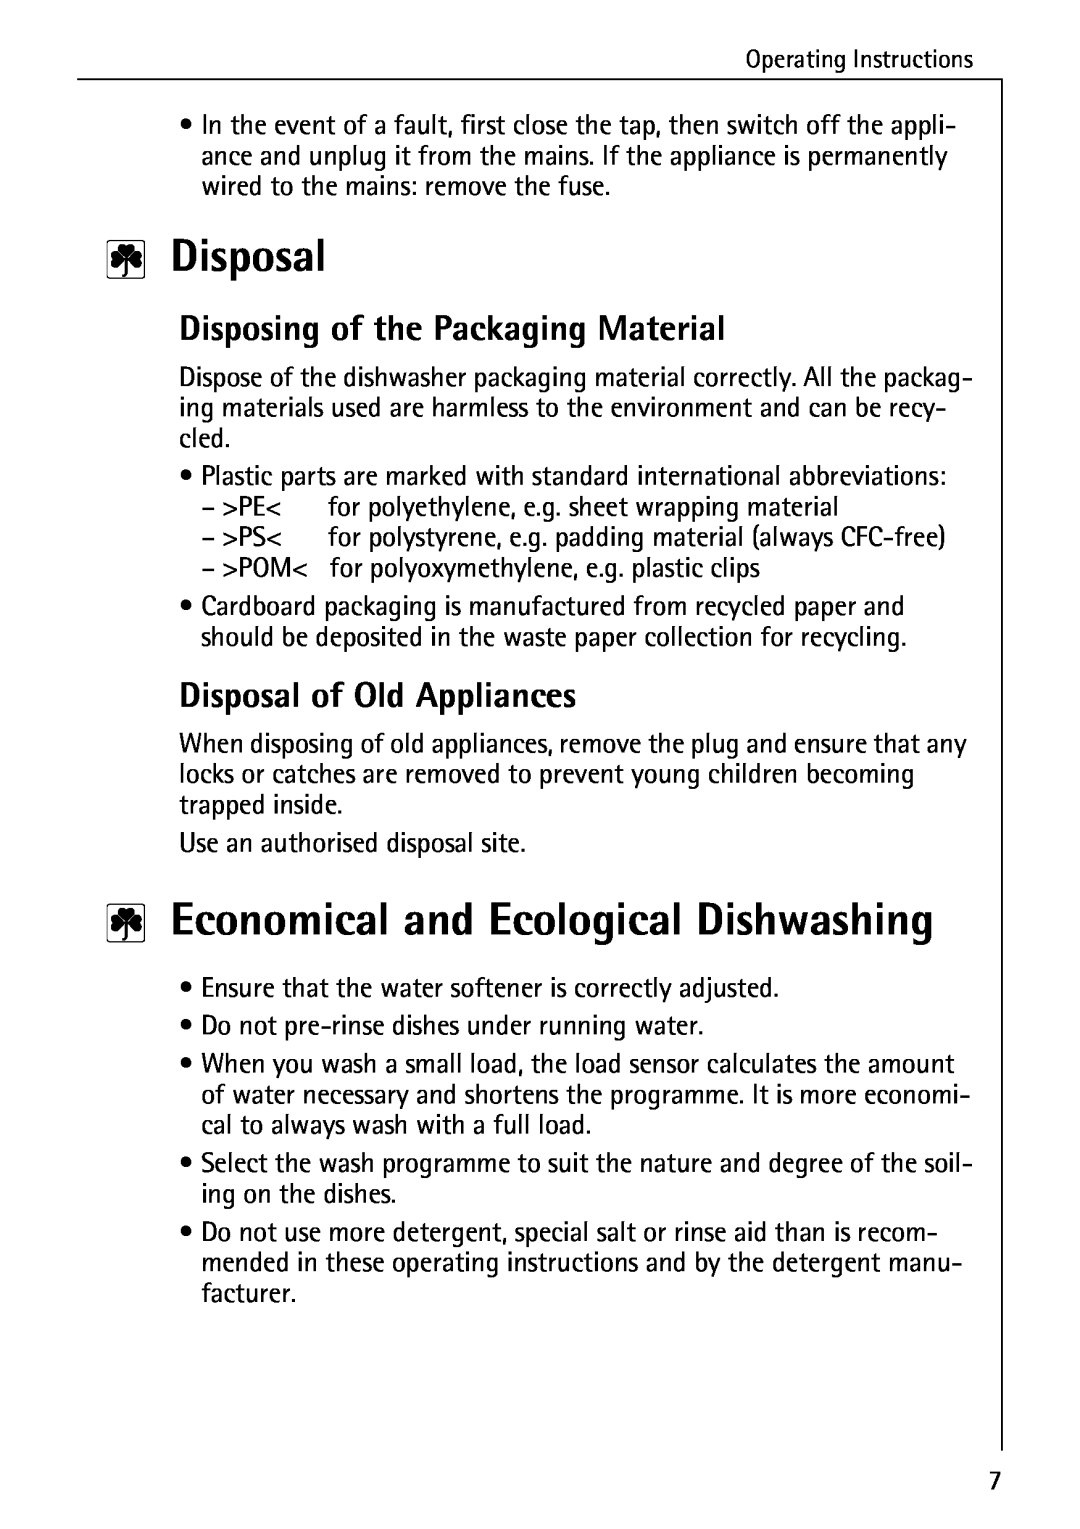 Electrolux 50610 manual Disposal, Economical and Ecological Dishwashing, Disposing of the Packaging Material 